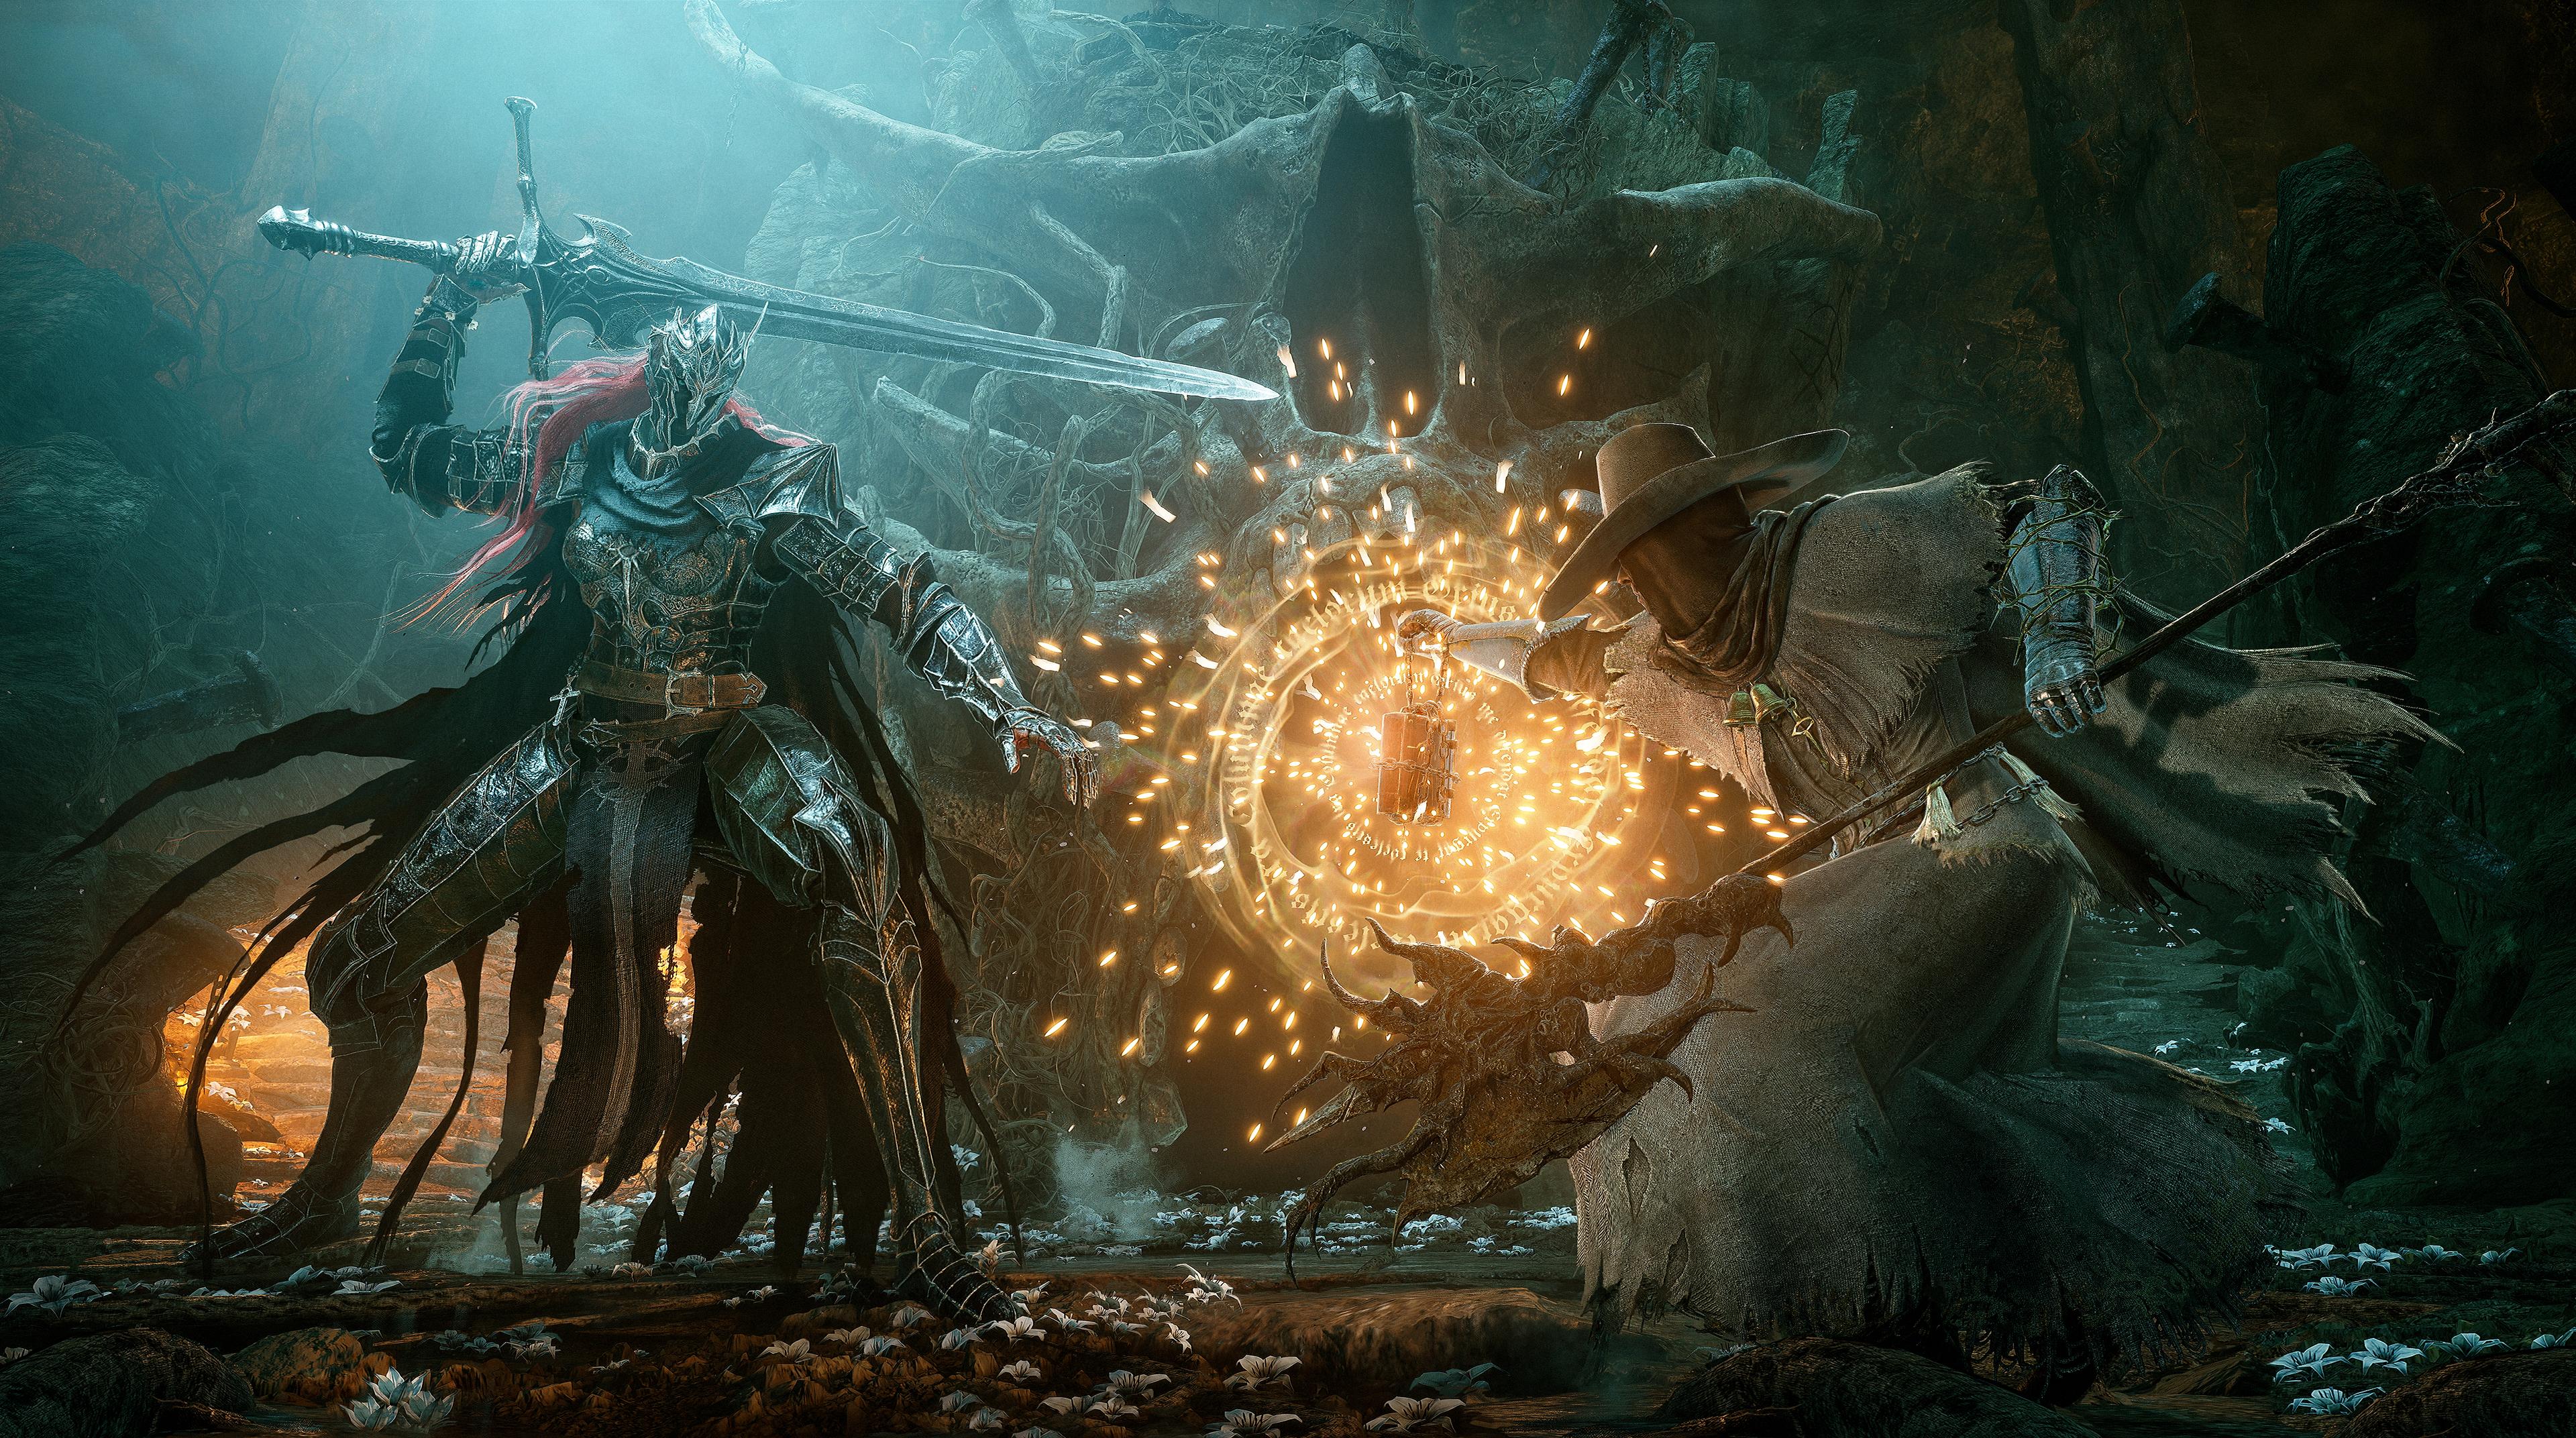 Two warriors clash in Lords of the Fallen